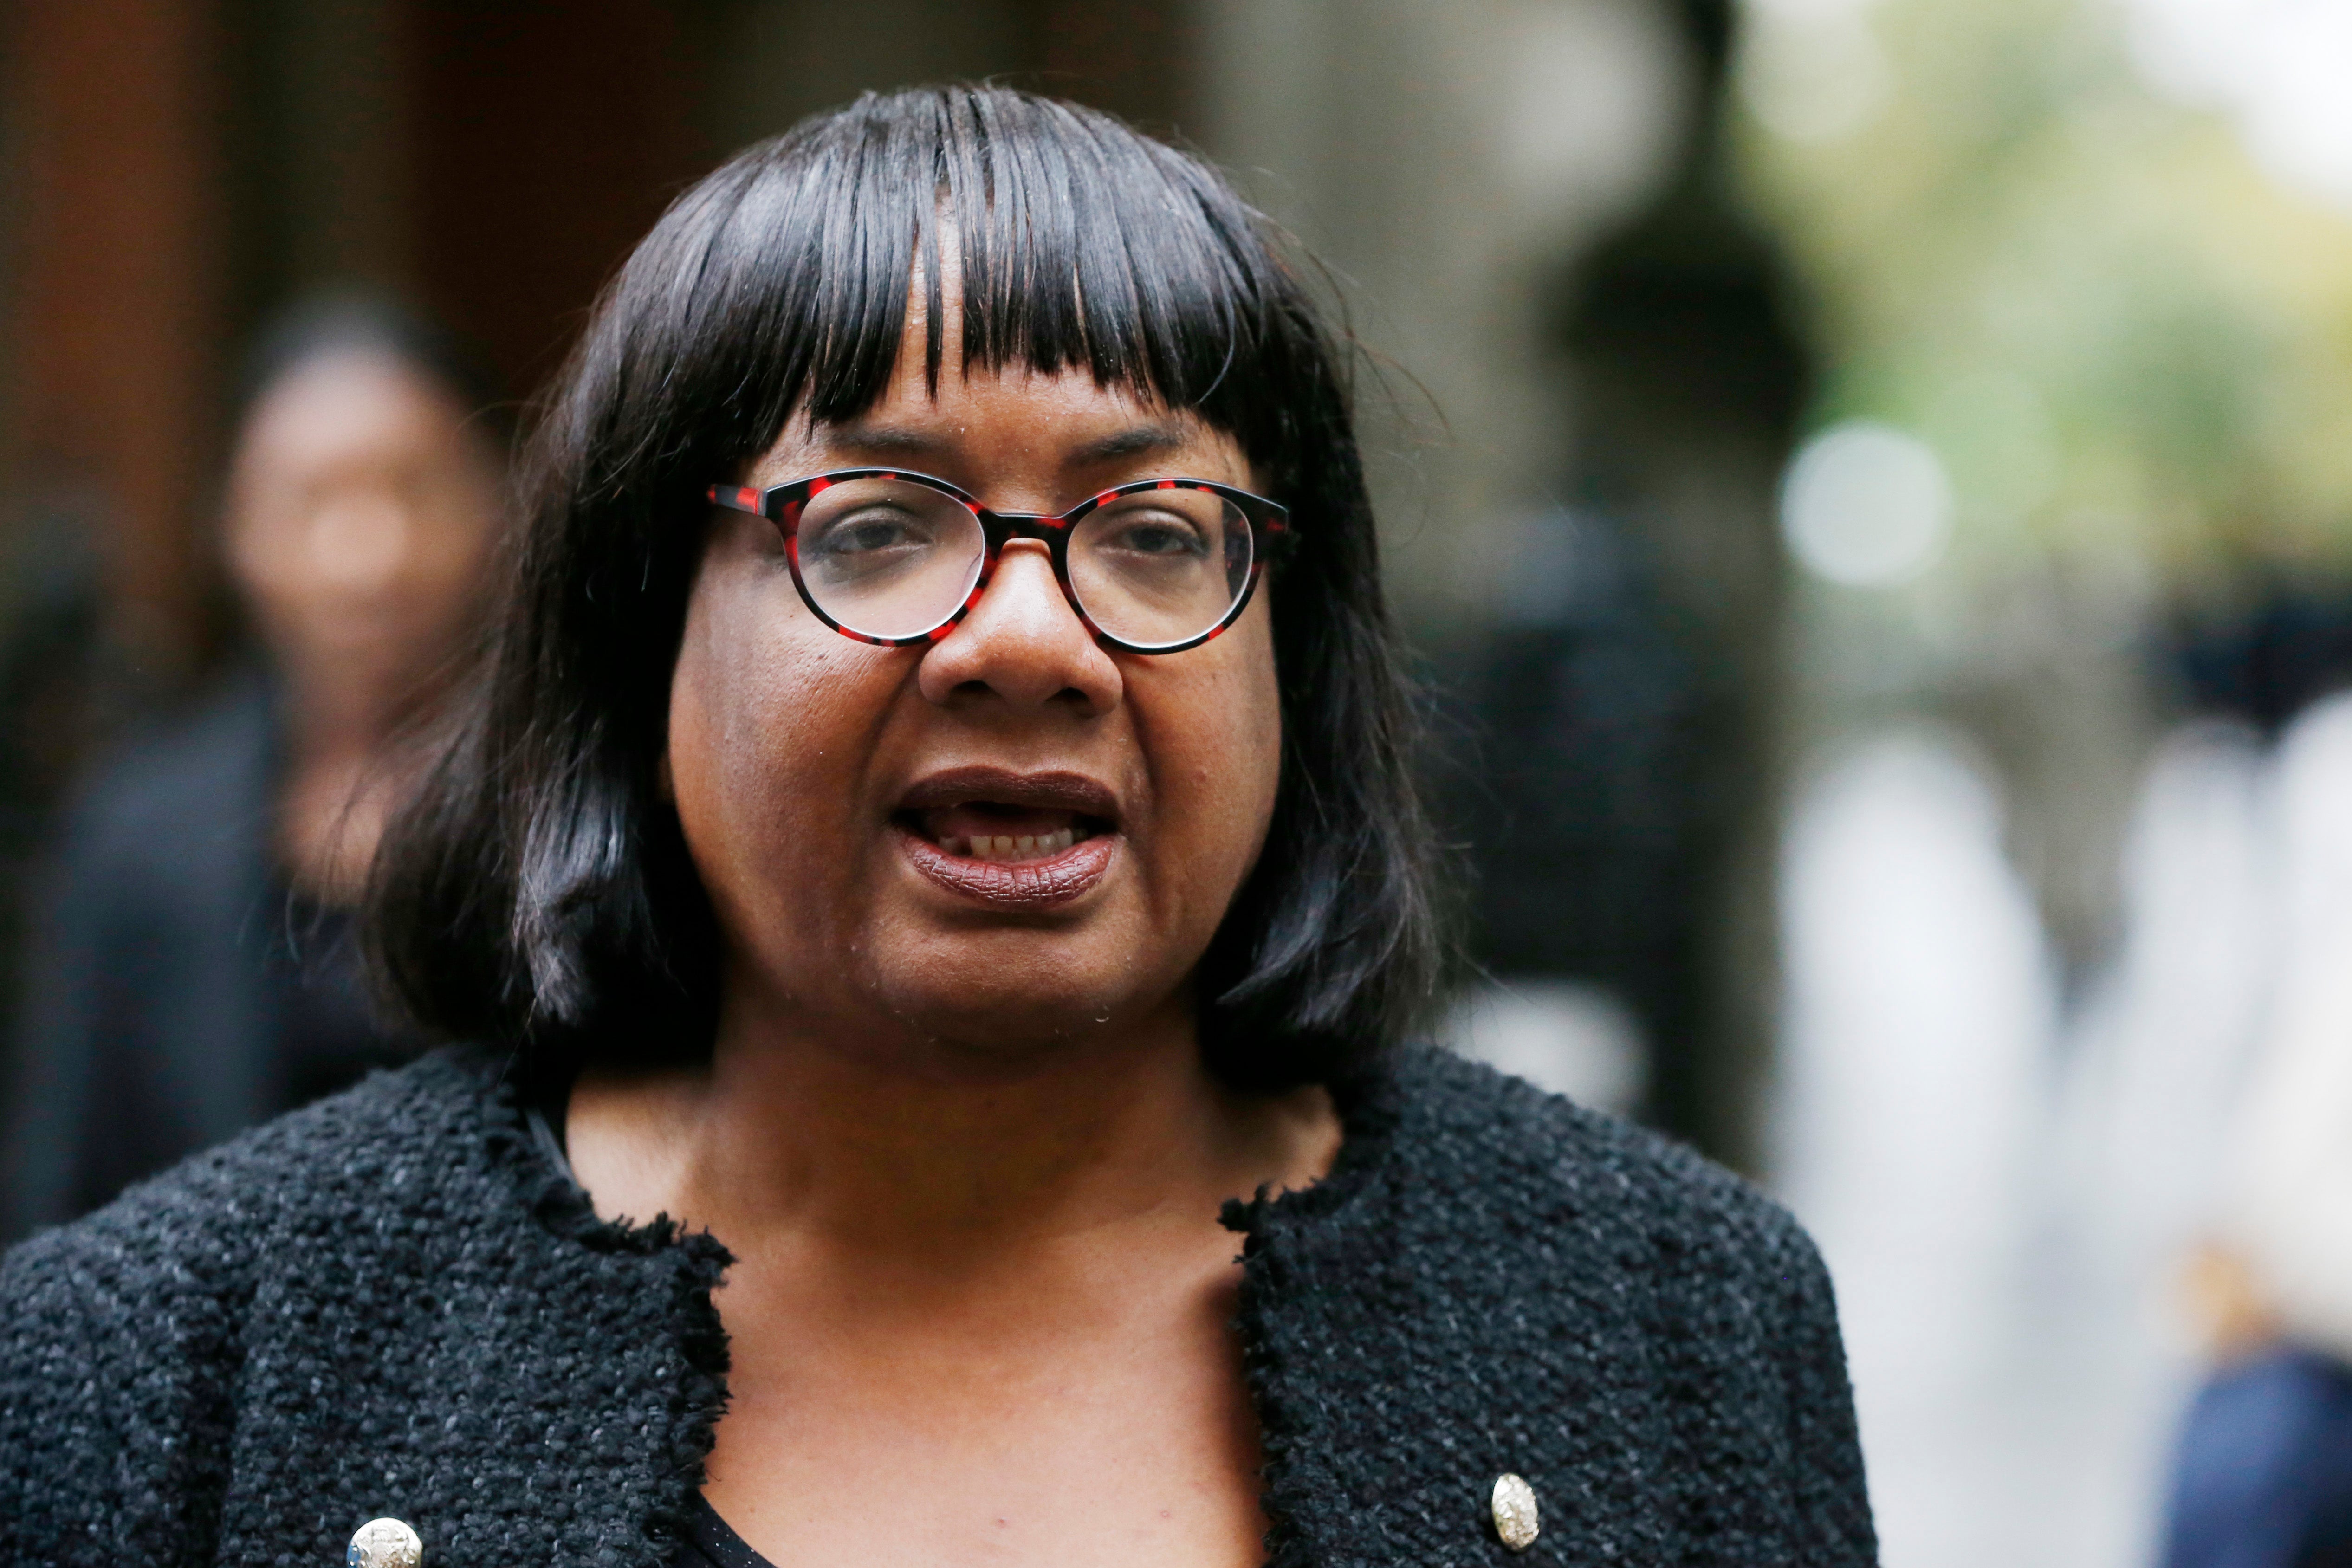 Hester reportedly said in a 2019 company meeting that Abbott, Britain’s longest-serving Black legislator, “should be shot”